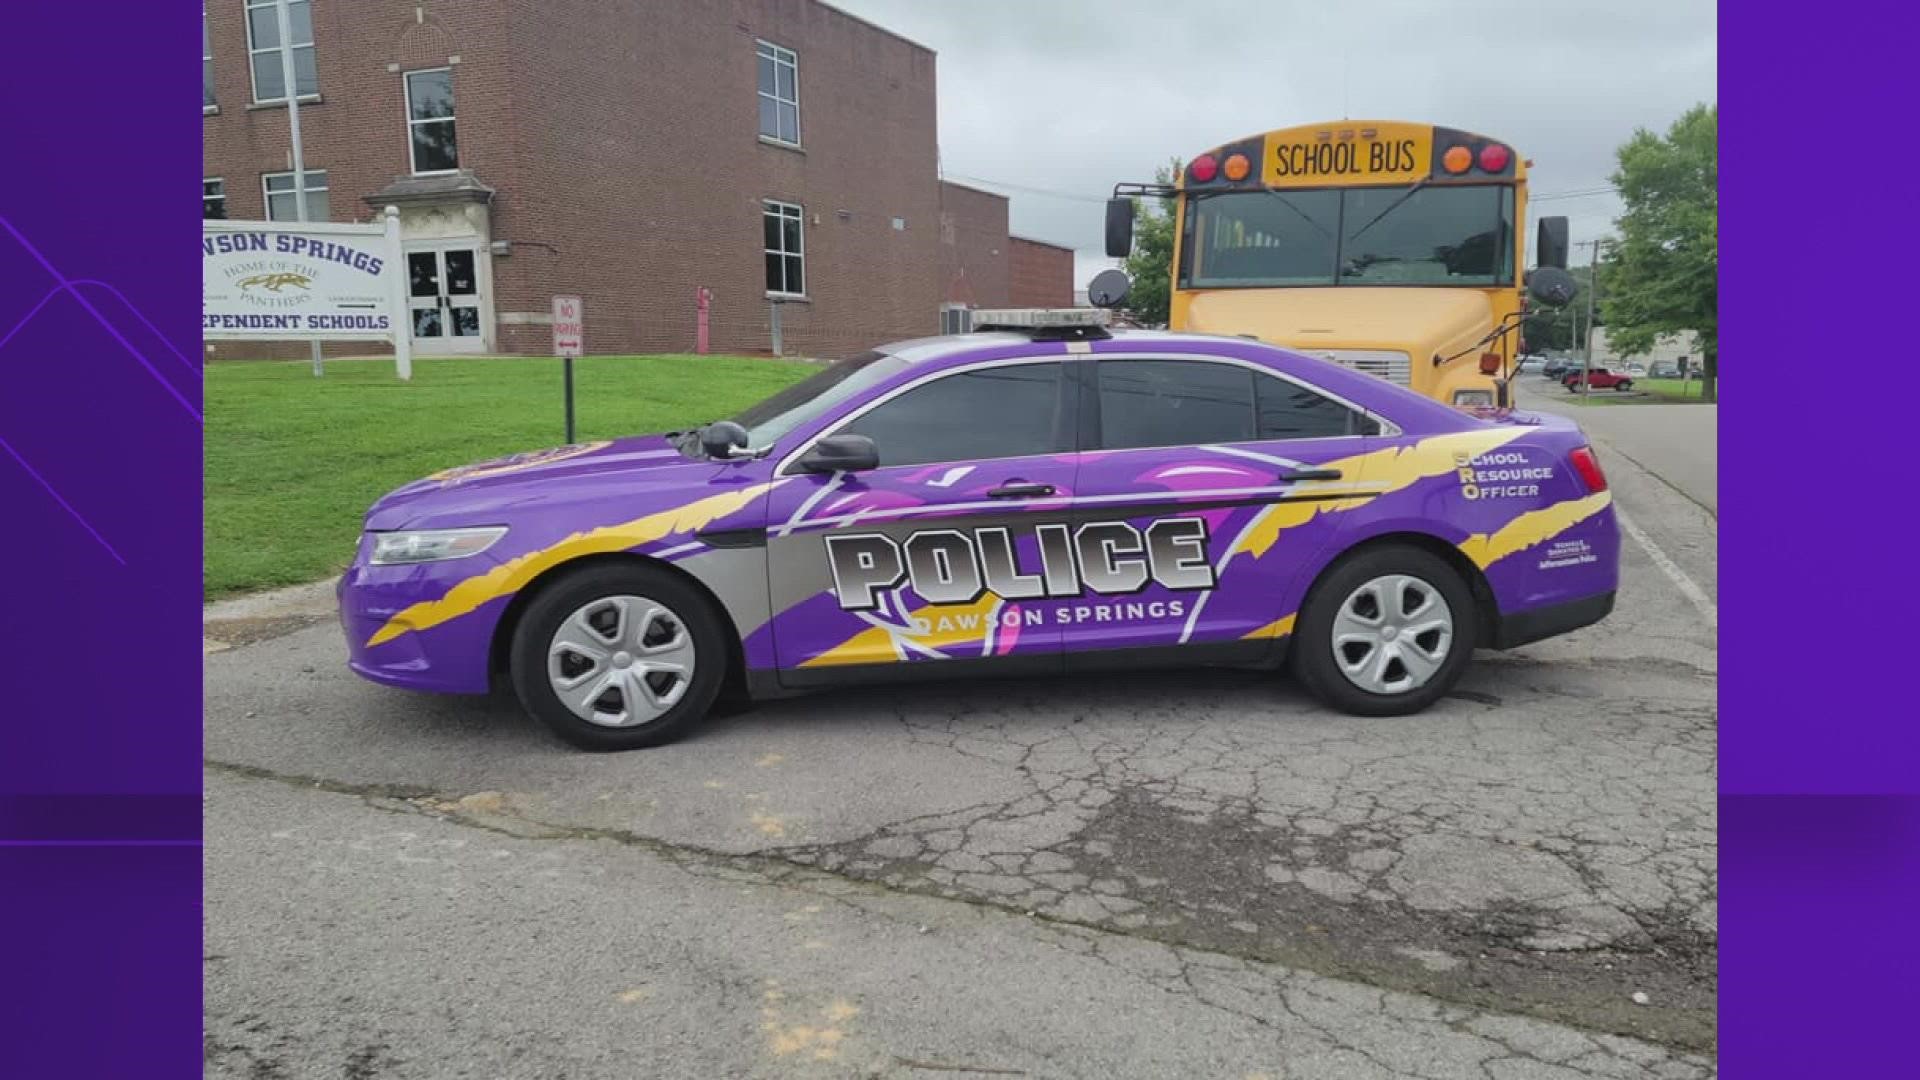 The cruiser overwent a new purple makeover that includes a special thank you to Jeffersontown police.